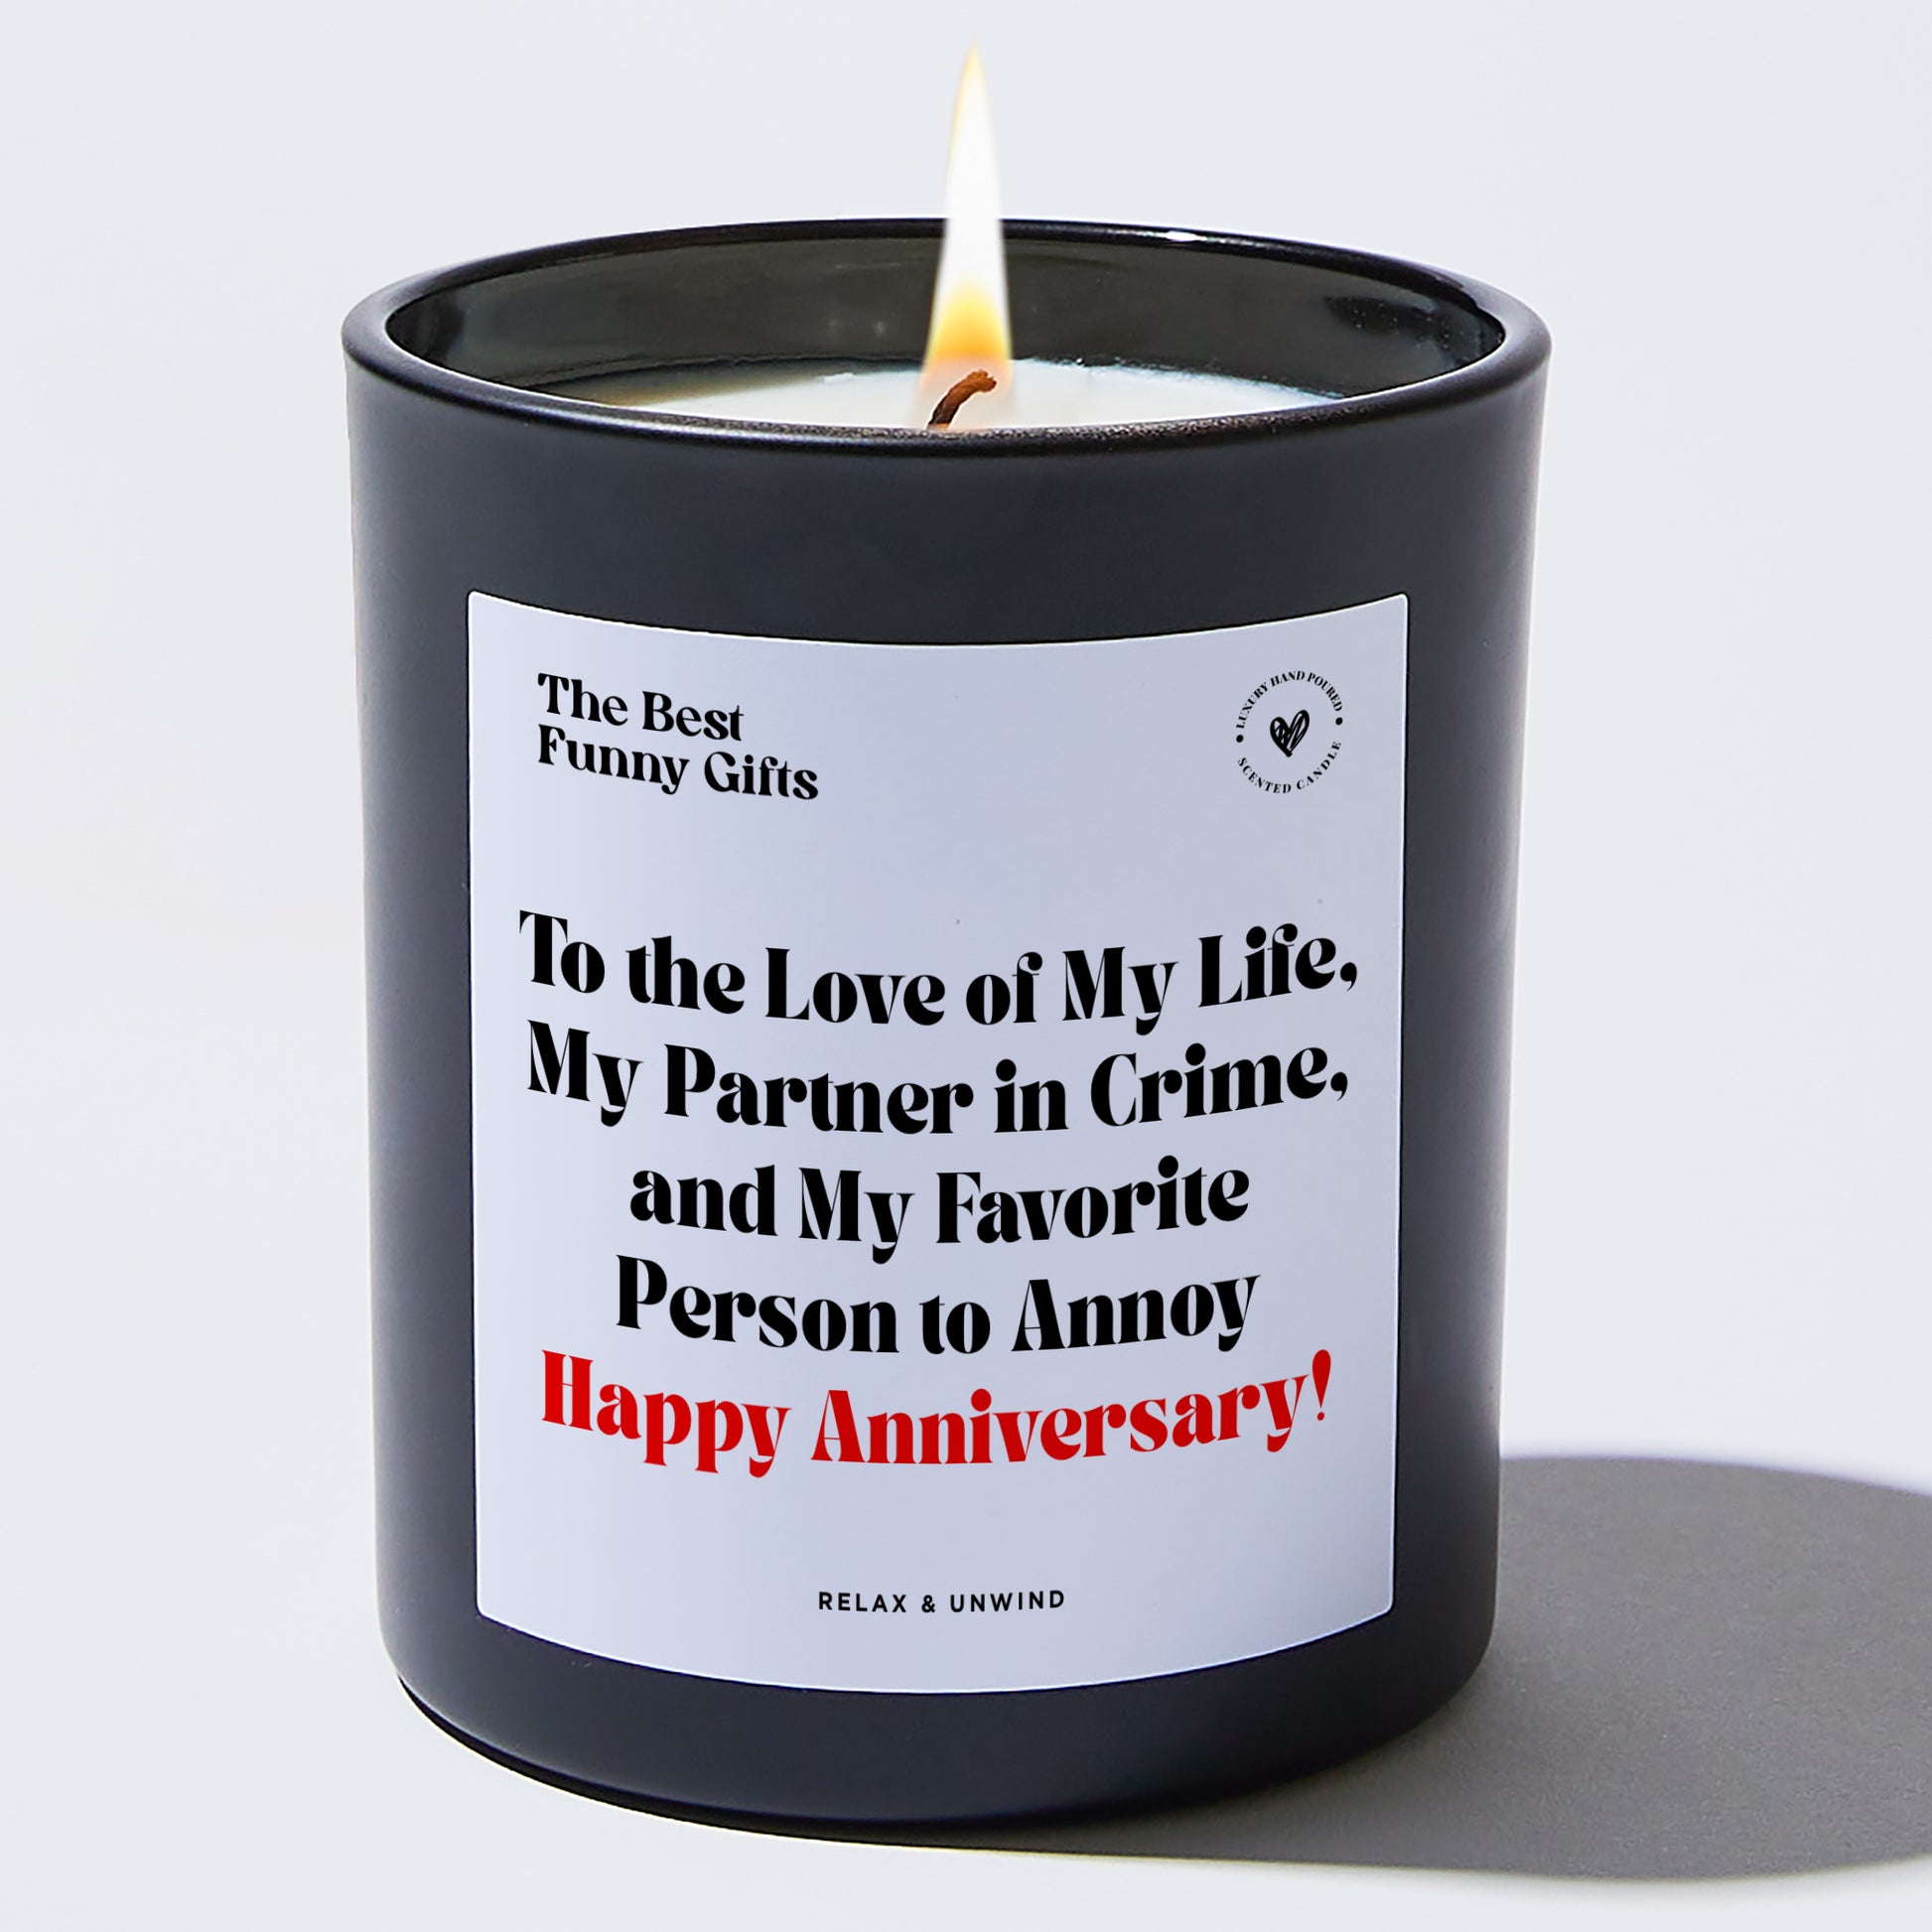 Anniversary To the Love of My Life, My Partner in Crime, and My Favorite Person to Annoy – Happy Anniversary! - The Best Funny Gifts